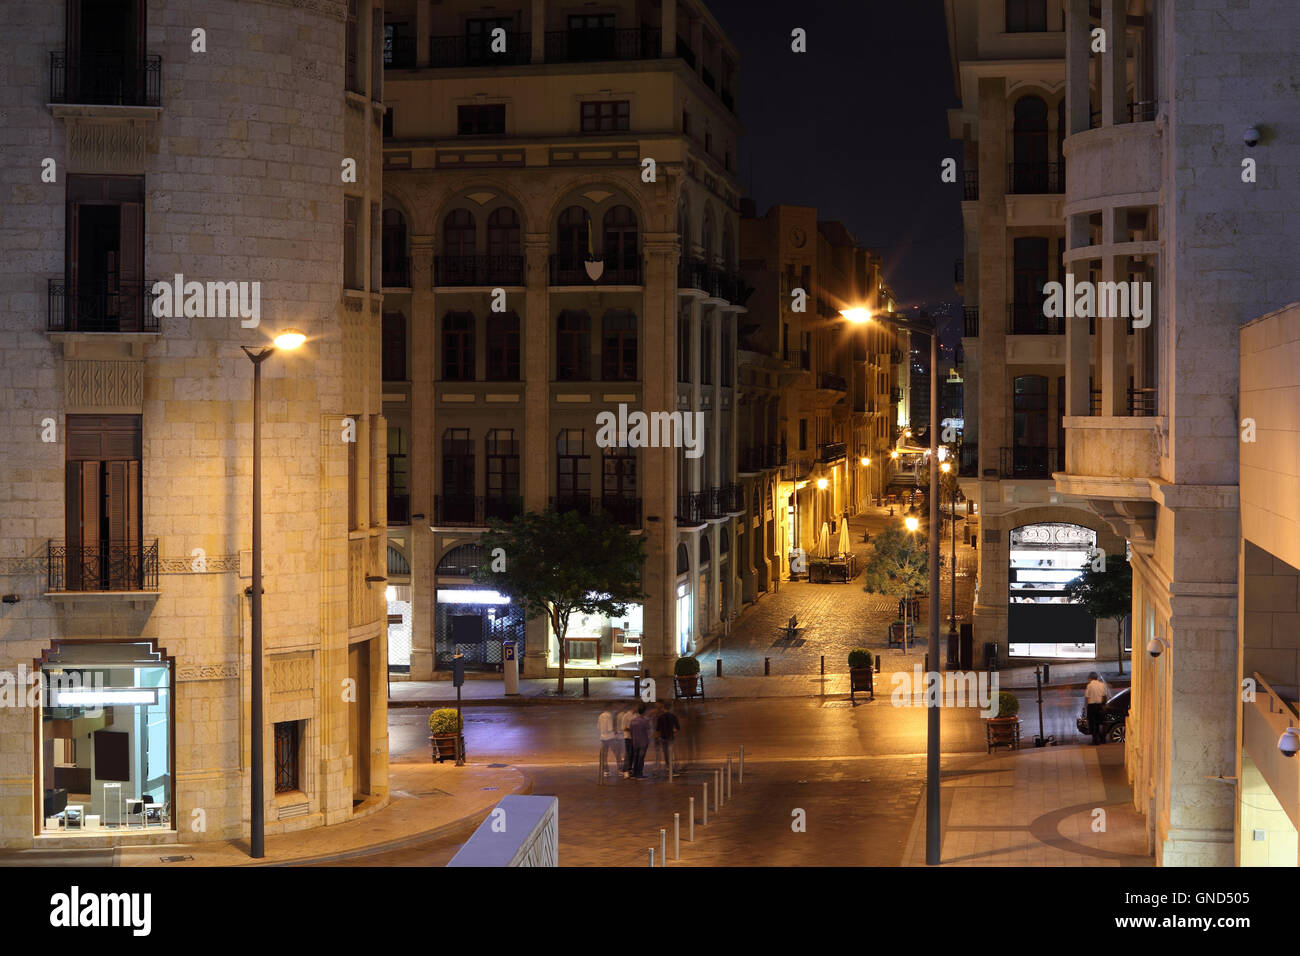 Beirut Shopping High Resolution Stock Photography and Images - Alamy